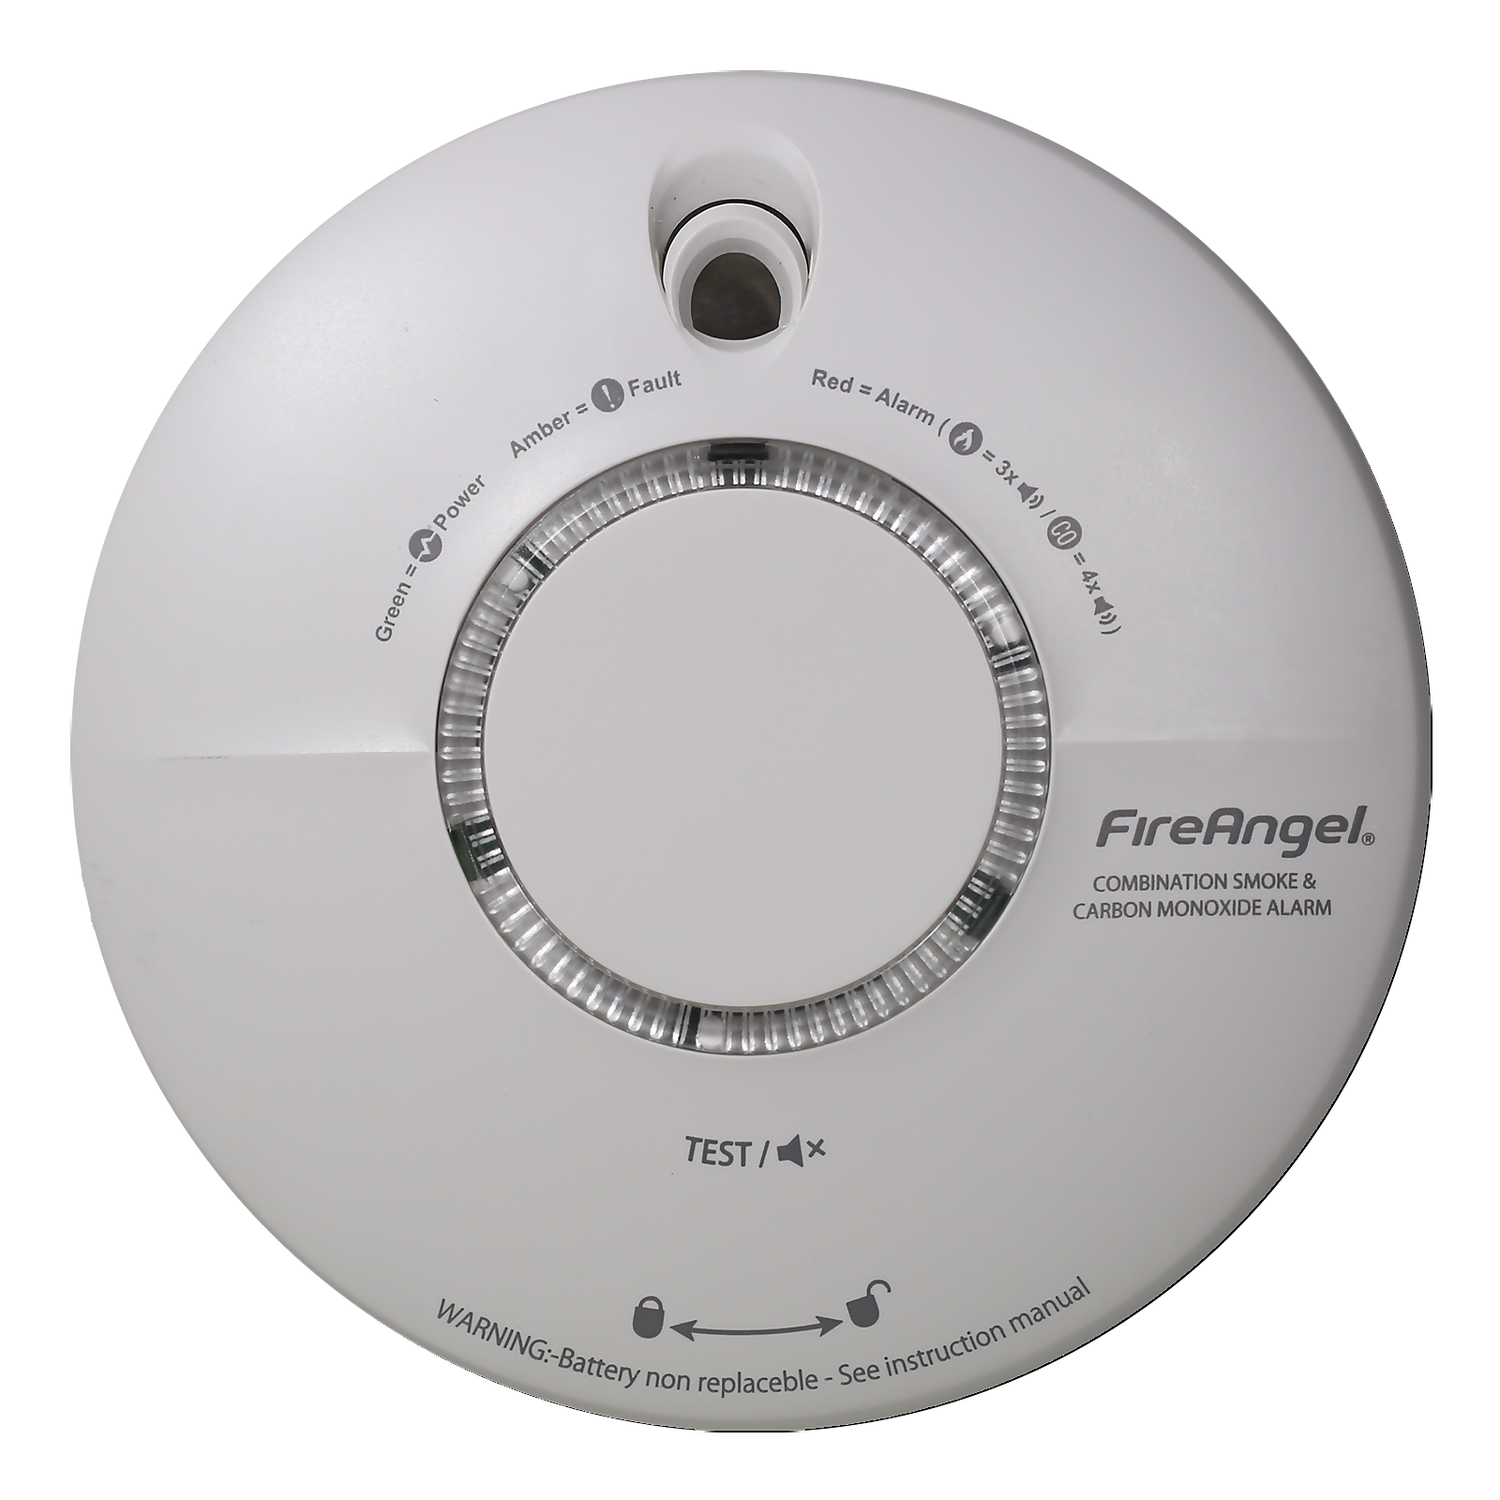 Experience Easy Alarm Testing With FireAngel